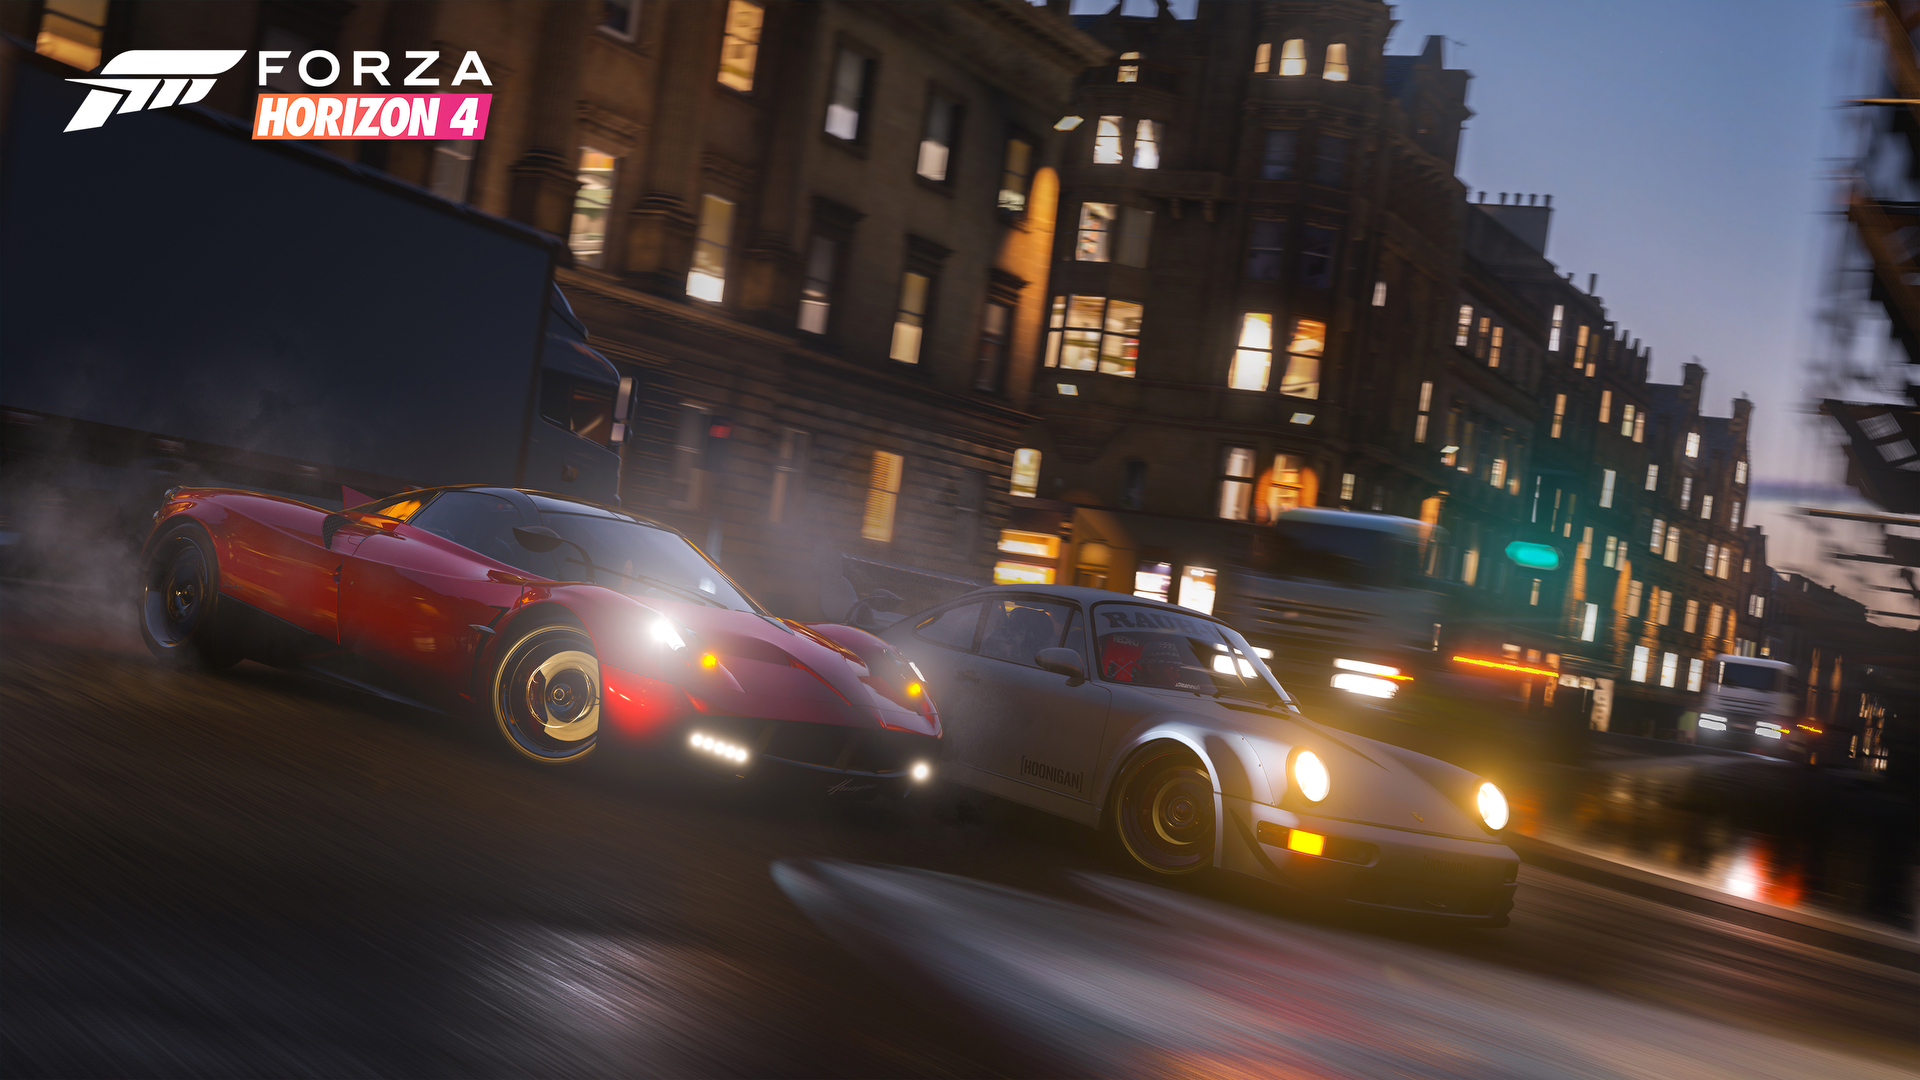 Nu Ulejlighed afdeling 'Forza Horizon 4' Races to Xbox One, Windows 10, Game Pass This October |  Digital Trends